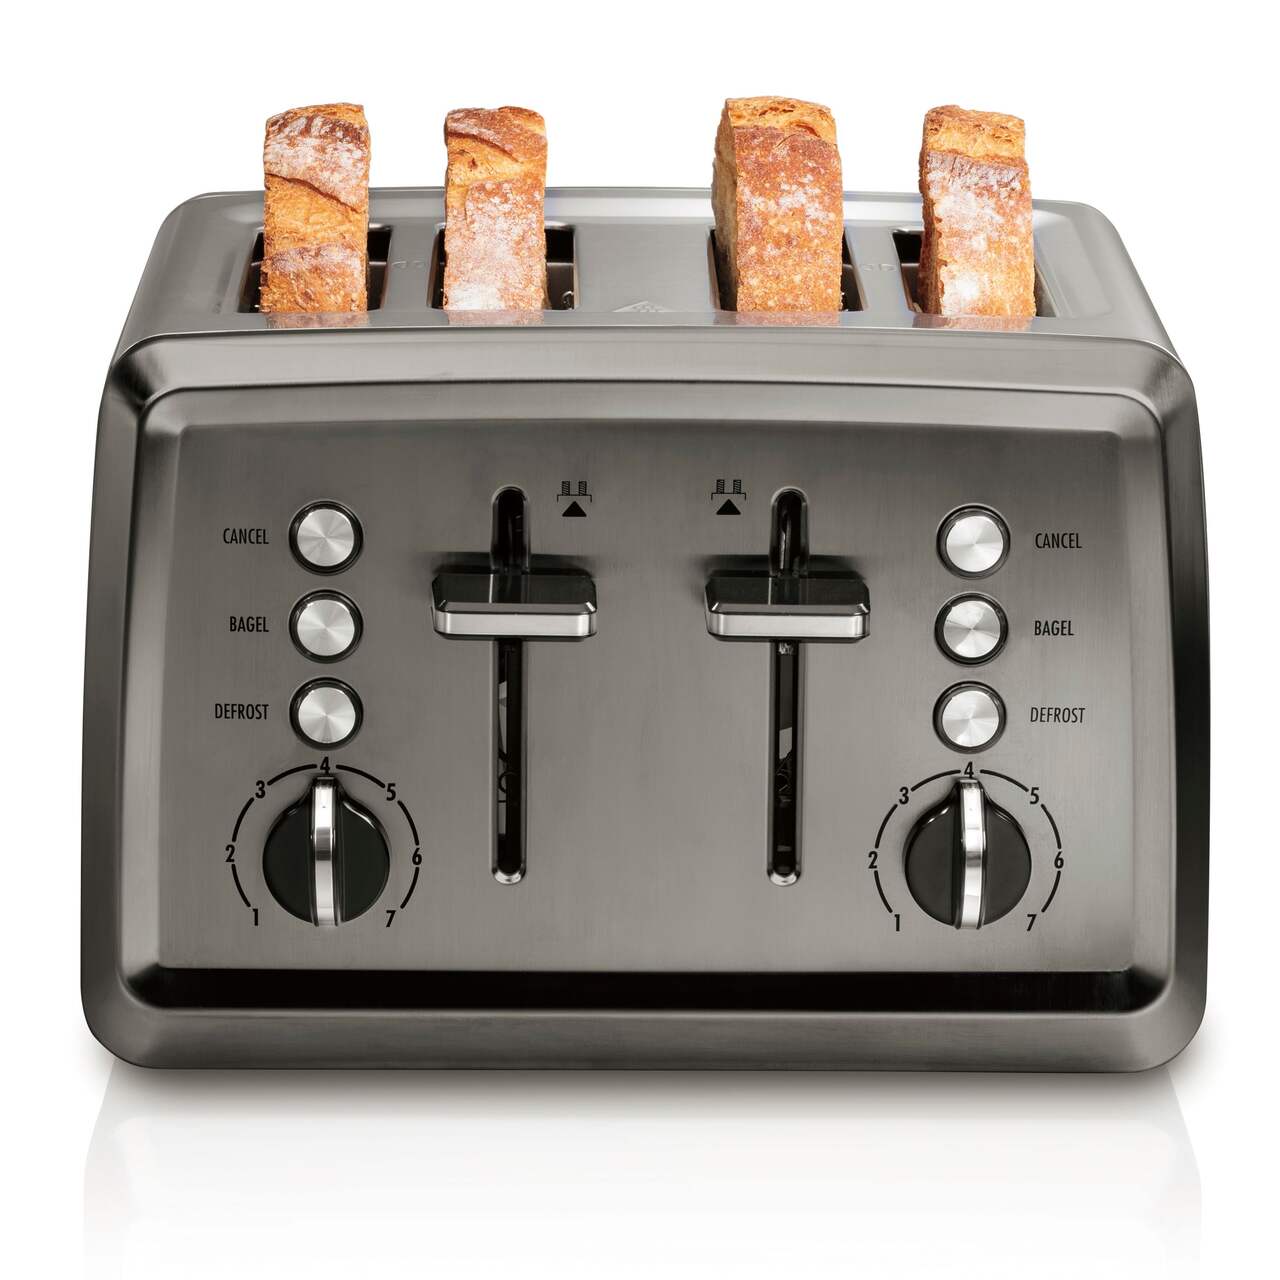 https://media-www.canadiantire.ca/product/living/kitchen/kitchen-appliances/0437306/hamilton-beach-elite-4-slice-toaster-c06bbd9f-a885-4a2d-ae83-c143c53443d8-jpgrendition.jpg?imdensity=1&imwidth=1244&impolicy=mZoom